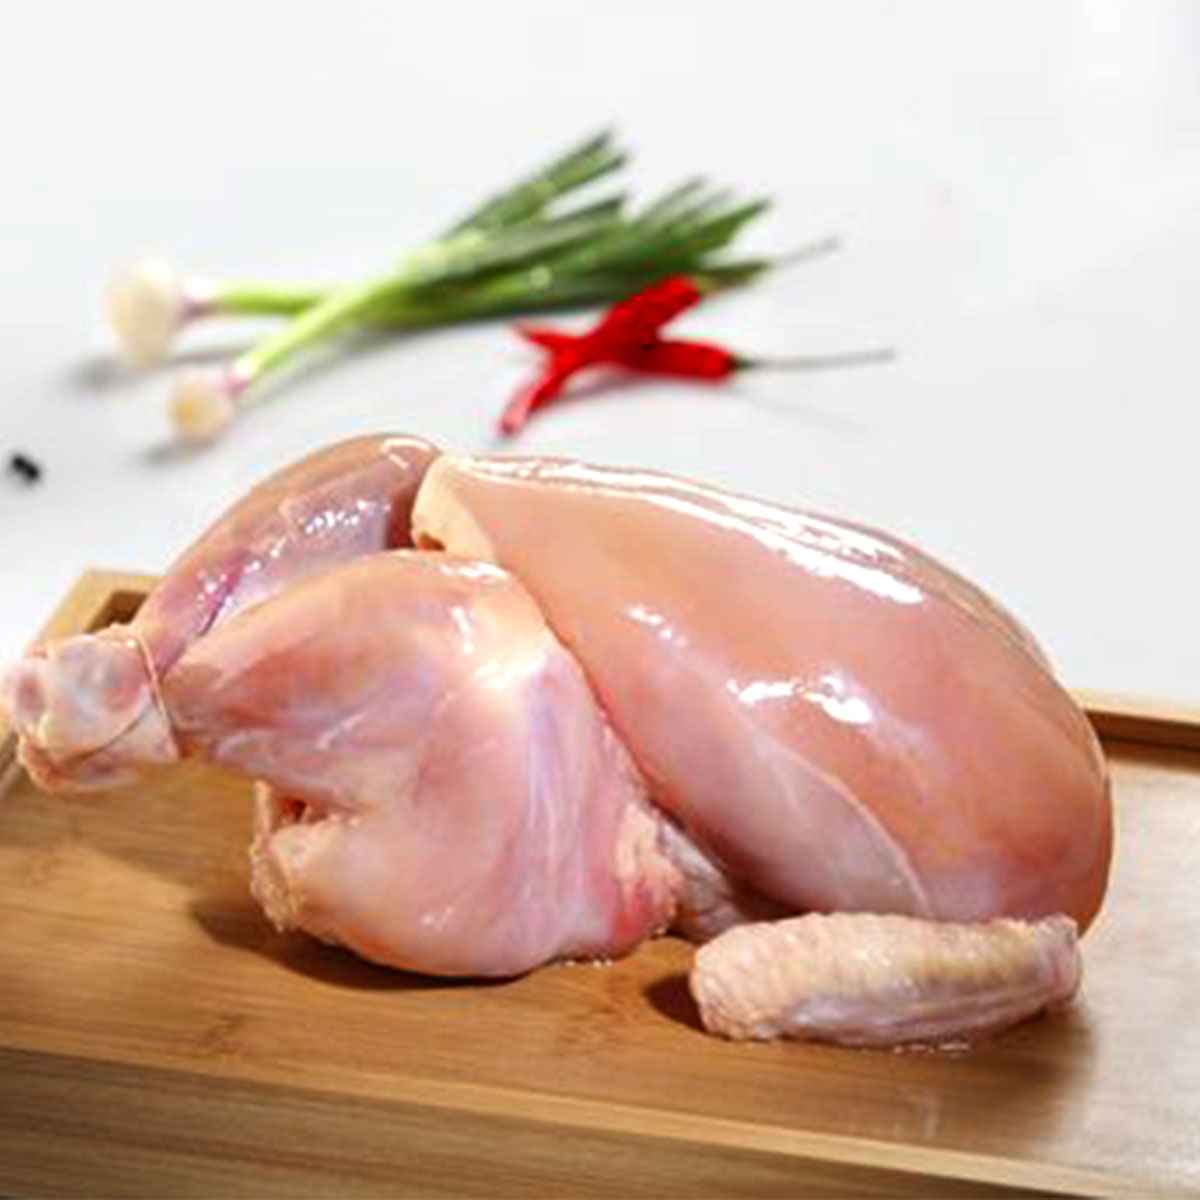 https://www.quicklly.com/upload_images/product/1620856849-whole-chicken-without-skin.jpg